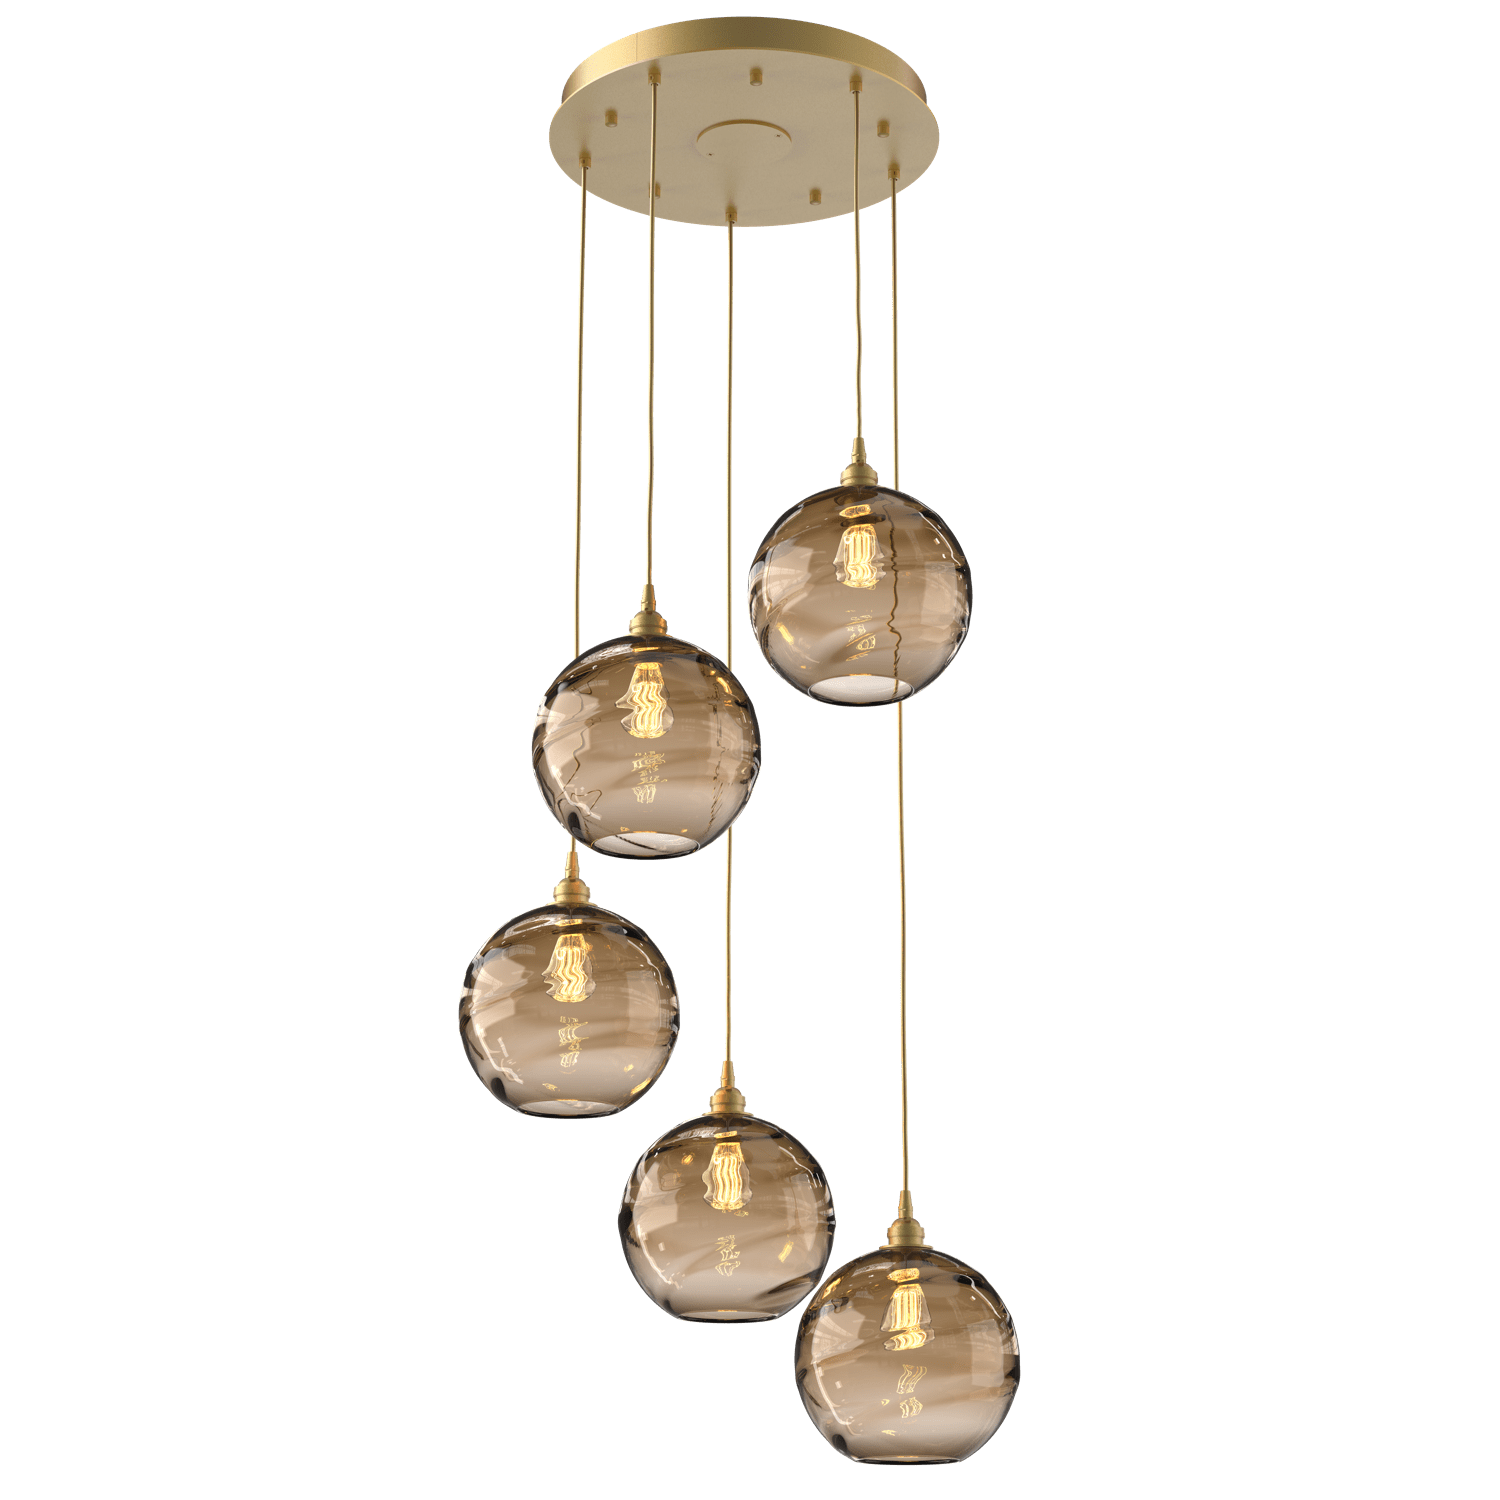 CHB0047-05-GB-OB-Hammerton-Studio-Optic-Blown-Glass-Terra-5-light-round-pendant-chandelier-with-gilded-brass-finish-and-optic-bronze-blown-glass-shades-and-incandescent-lamping